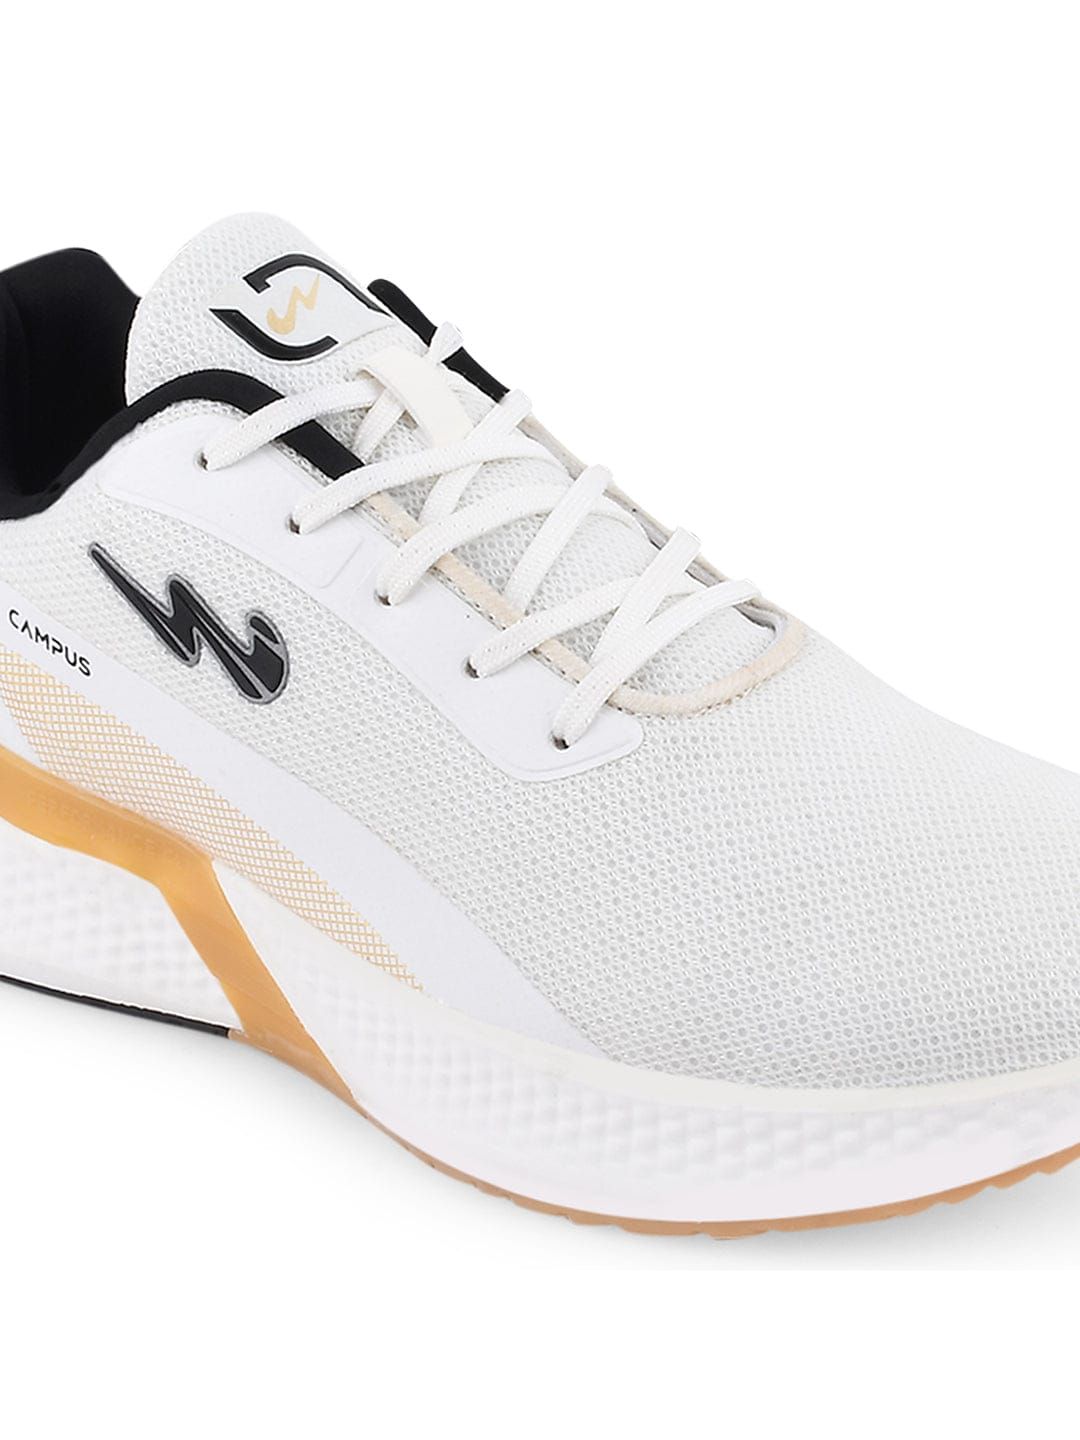 Buy Men Off White Camp-Stardom Running Shoes From Fancode Shop.